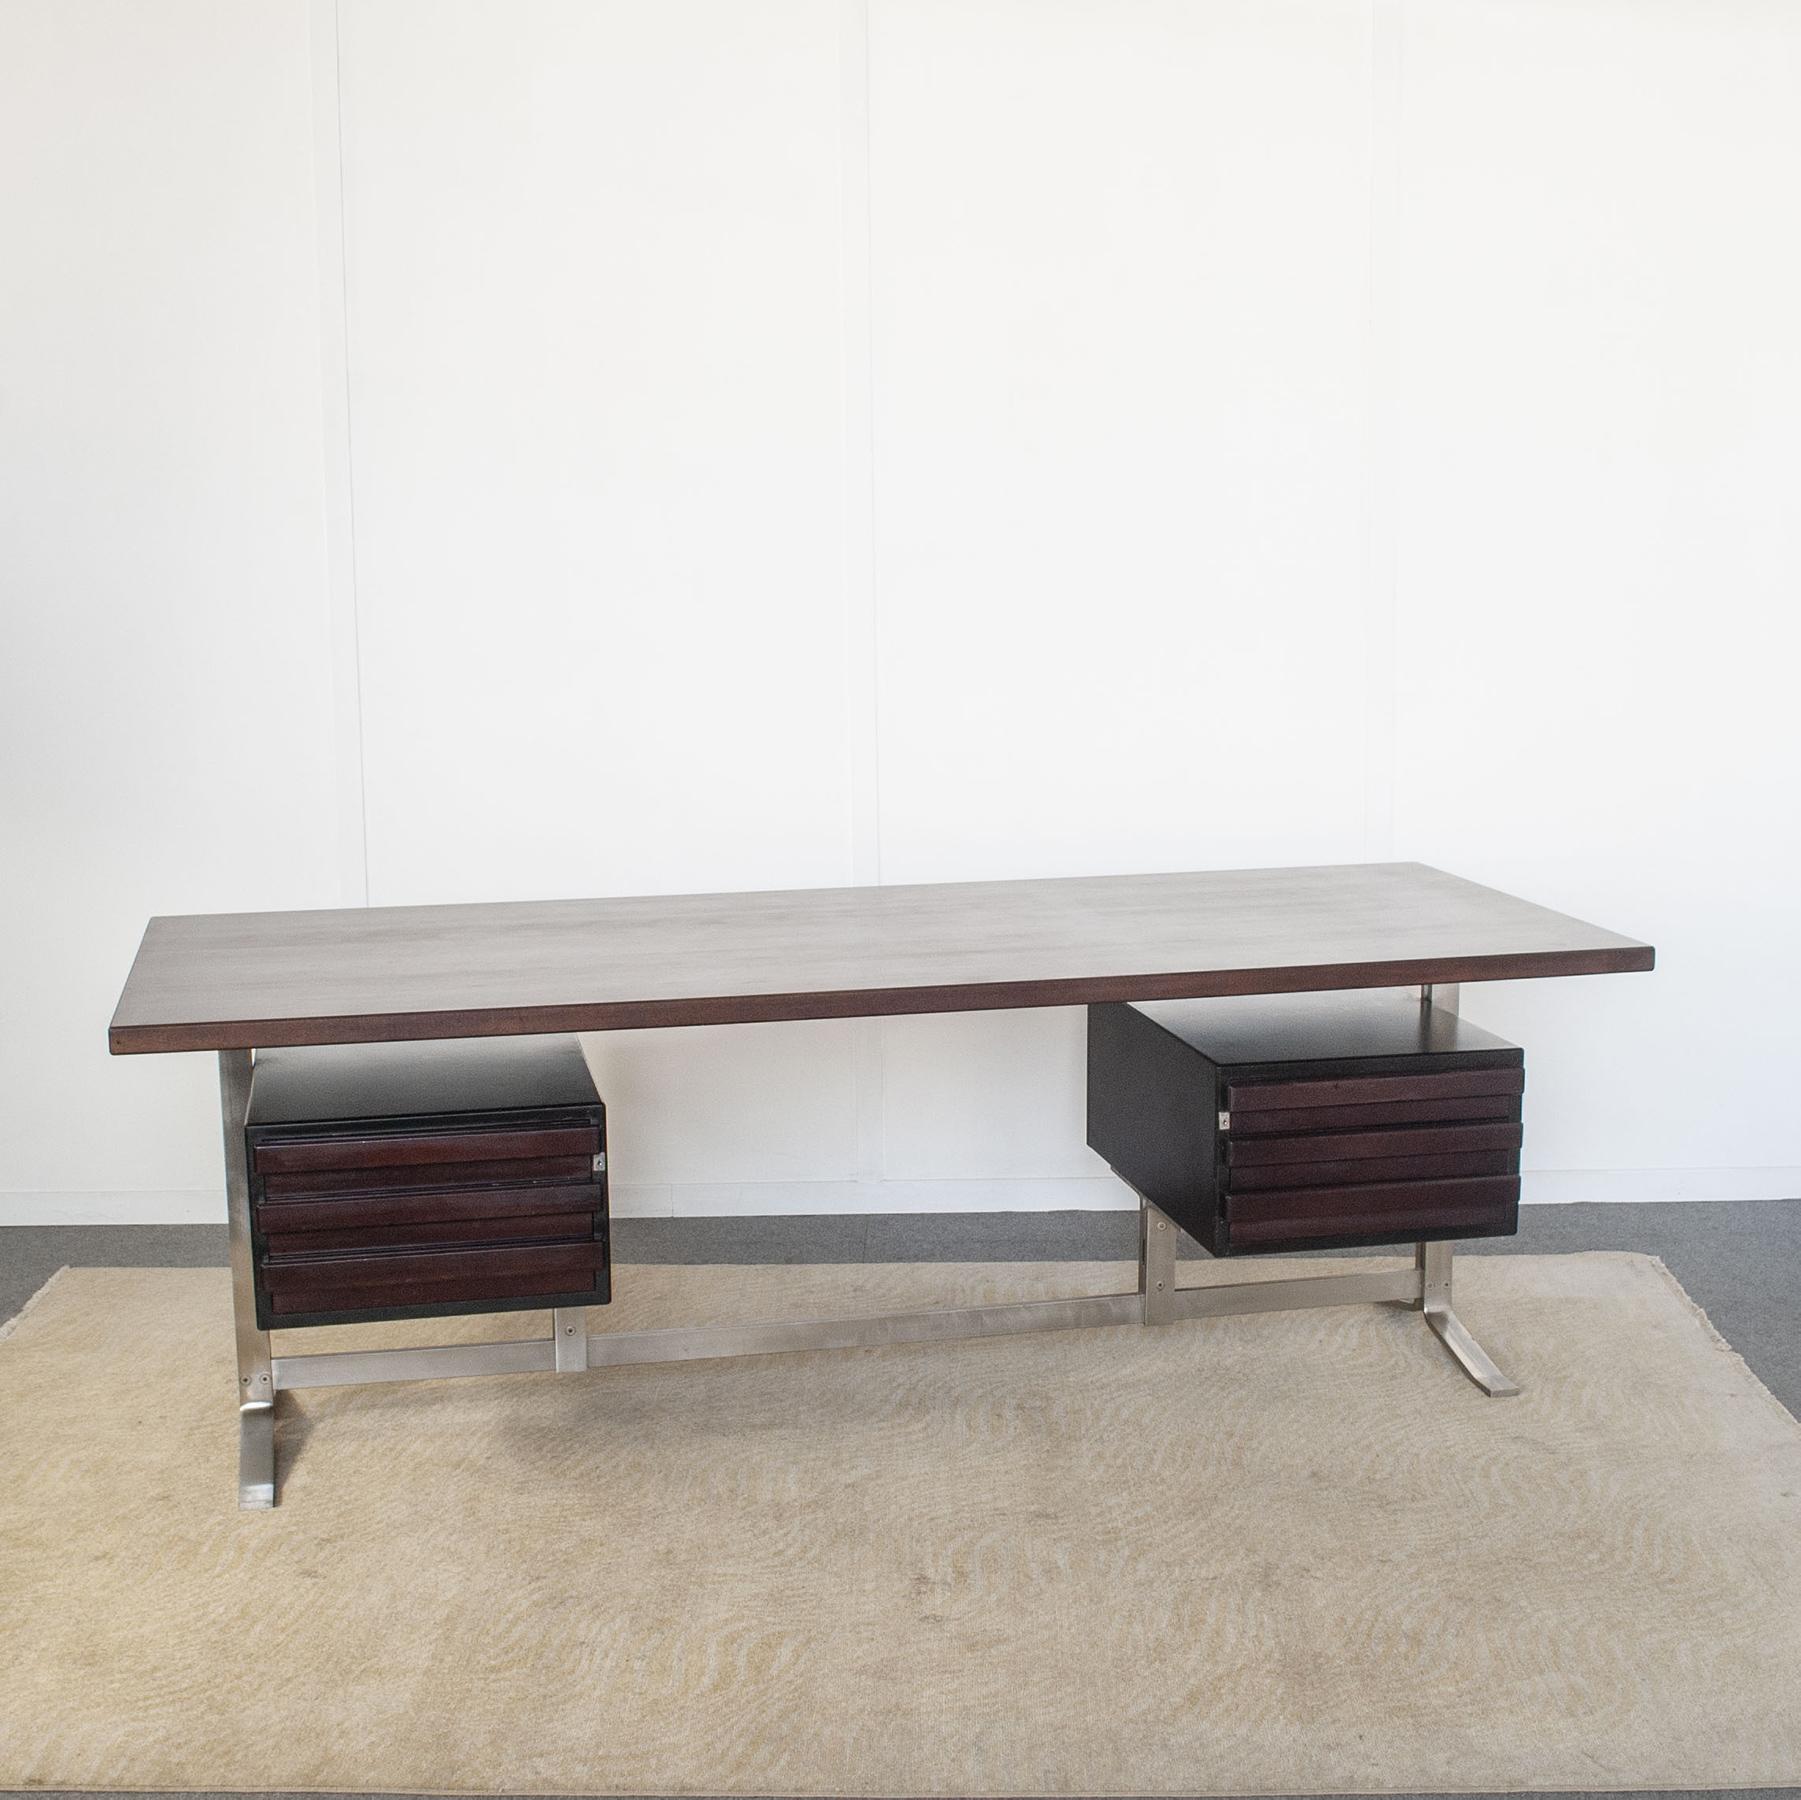 Desk design by Gianni Moscatelli for Formanova 1970s. Palisander desk surface rests on flat stainless steel legs with floating drawers on either side. Original locks without keys.